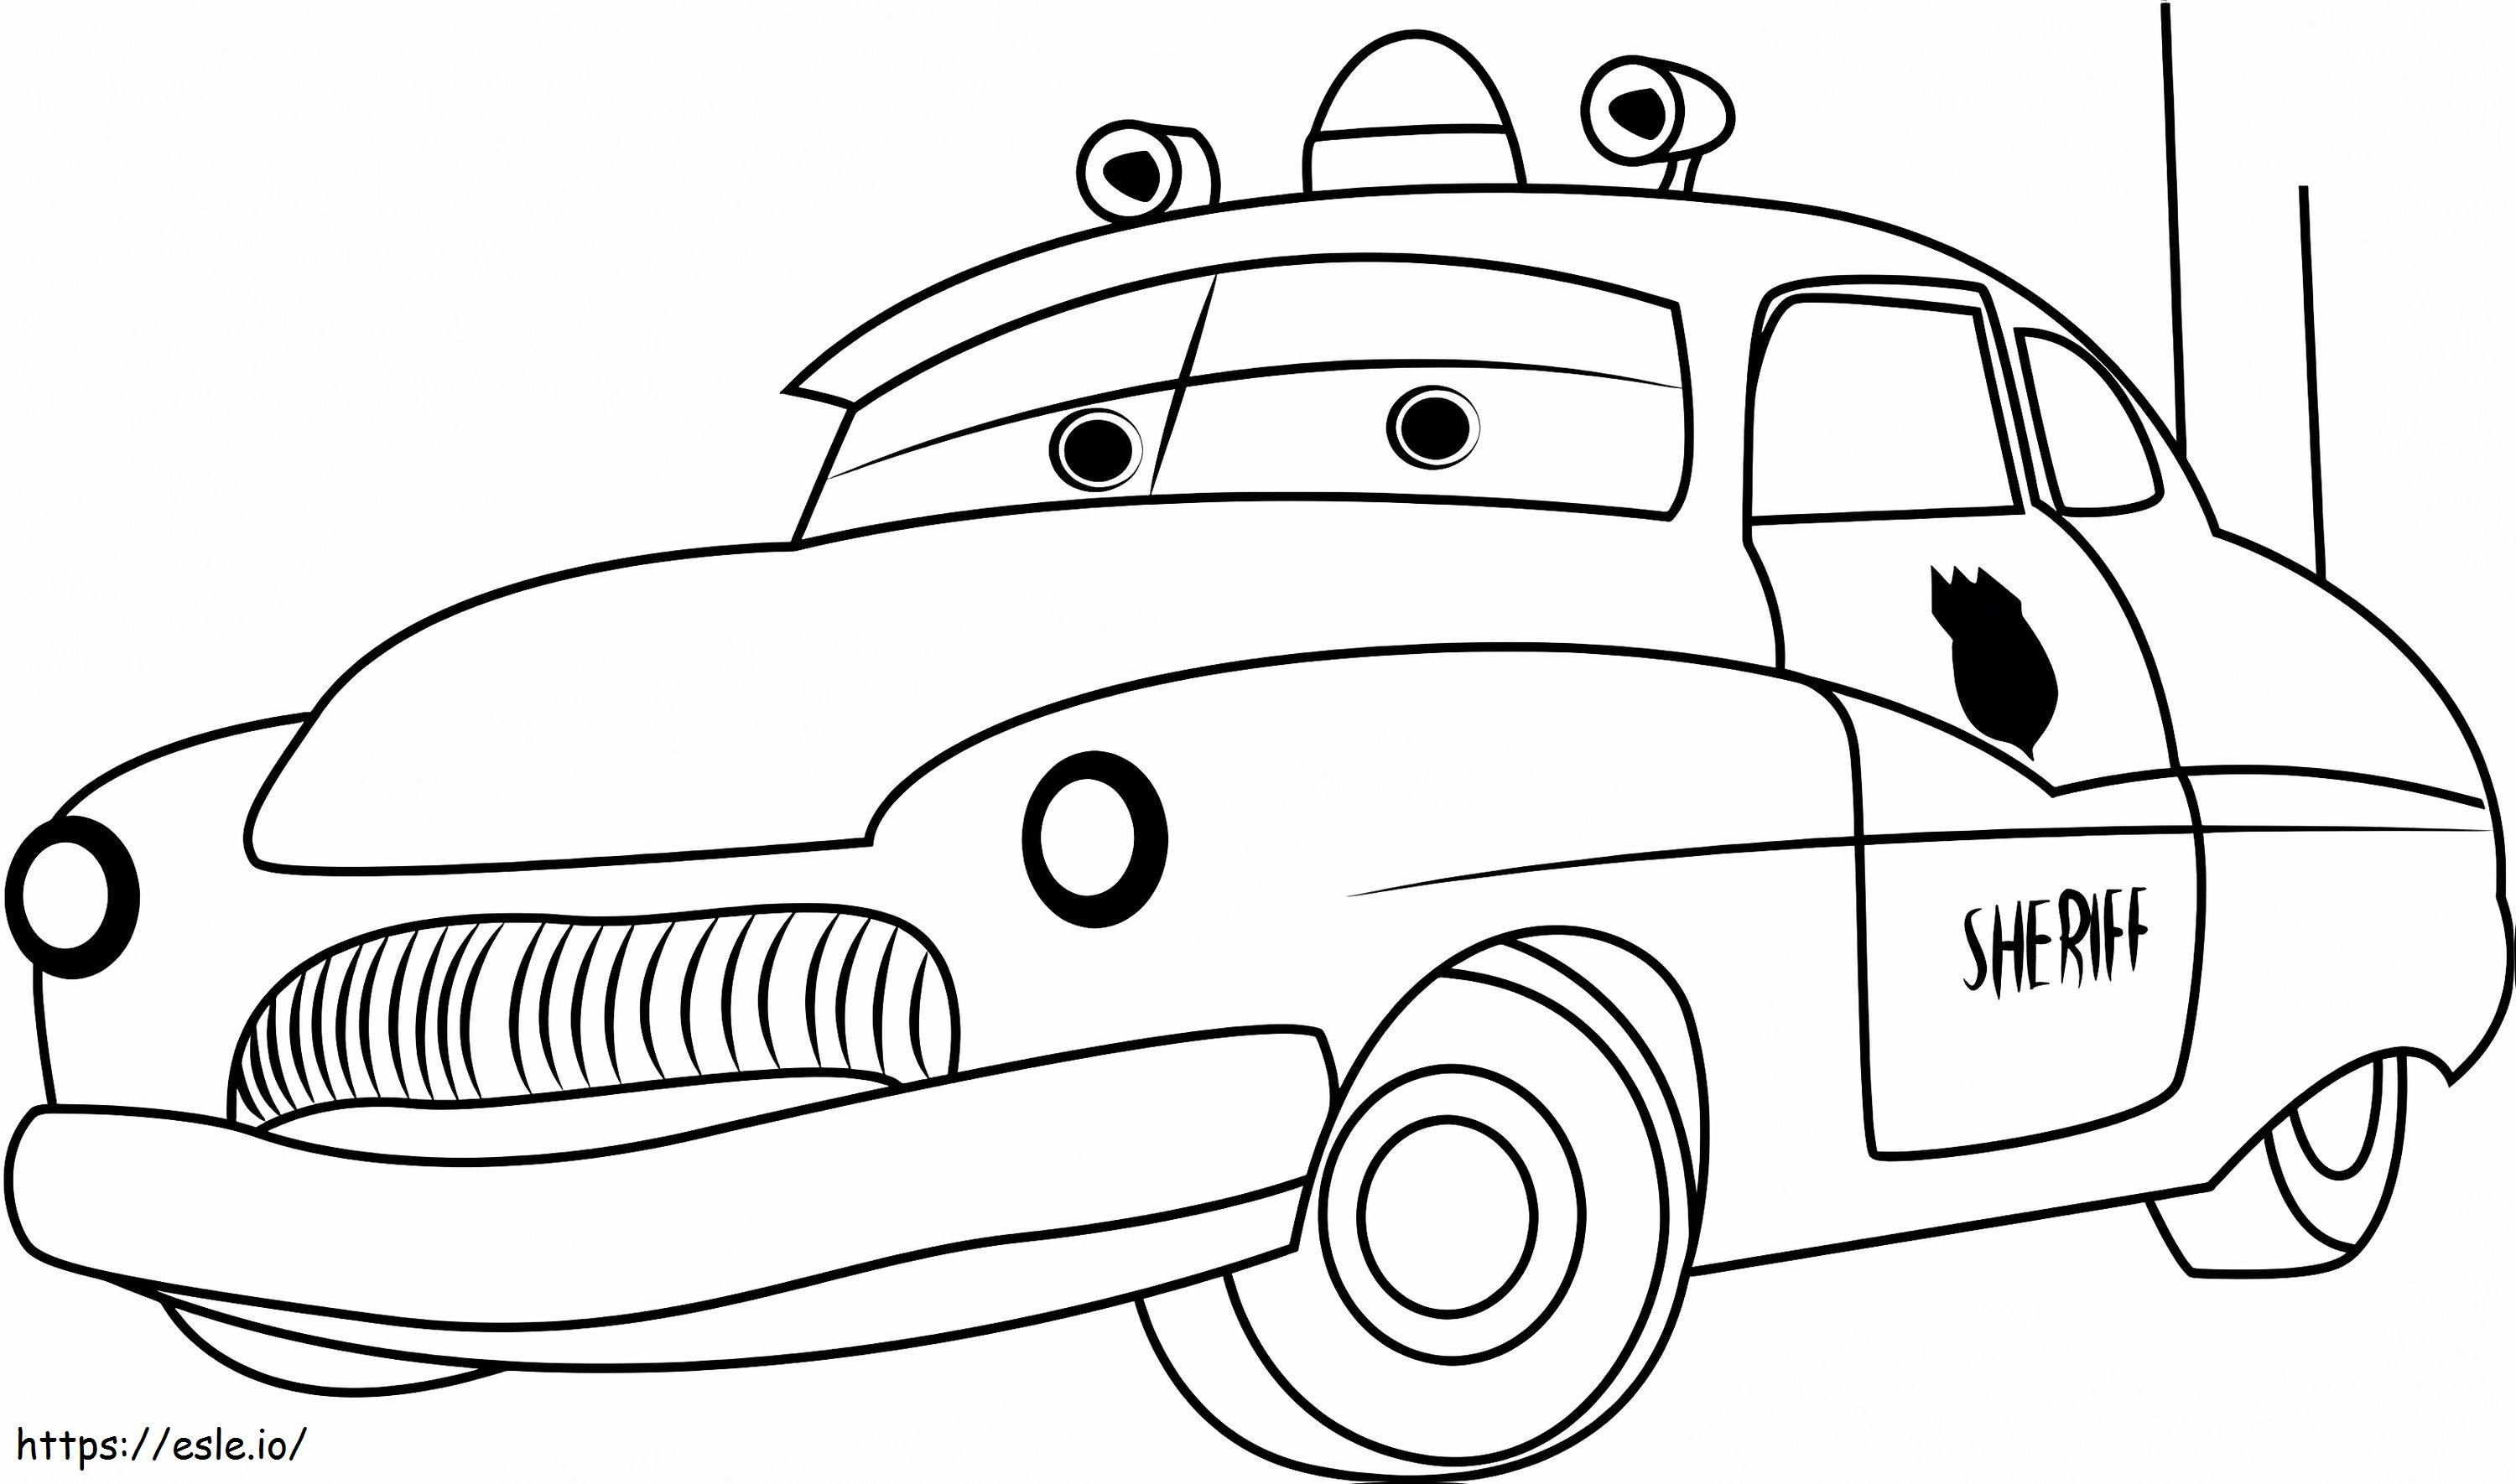 1532312480 Sheriff From Cars A4 E1600337182791 coloring page